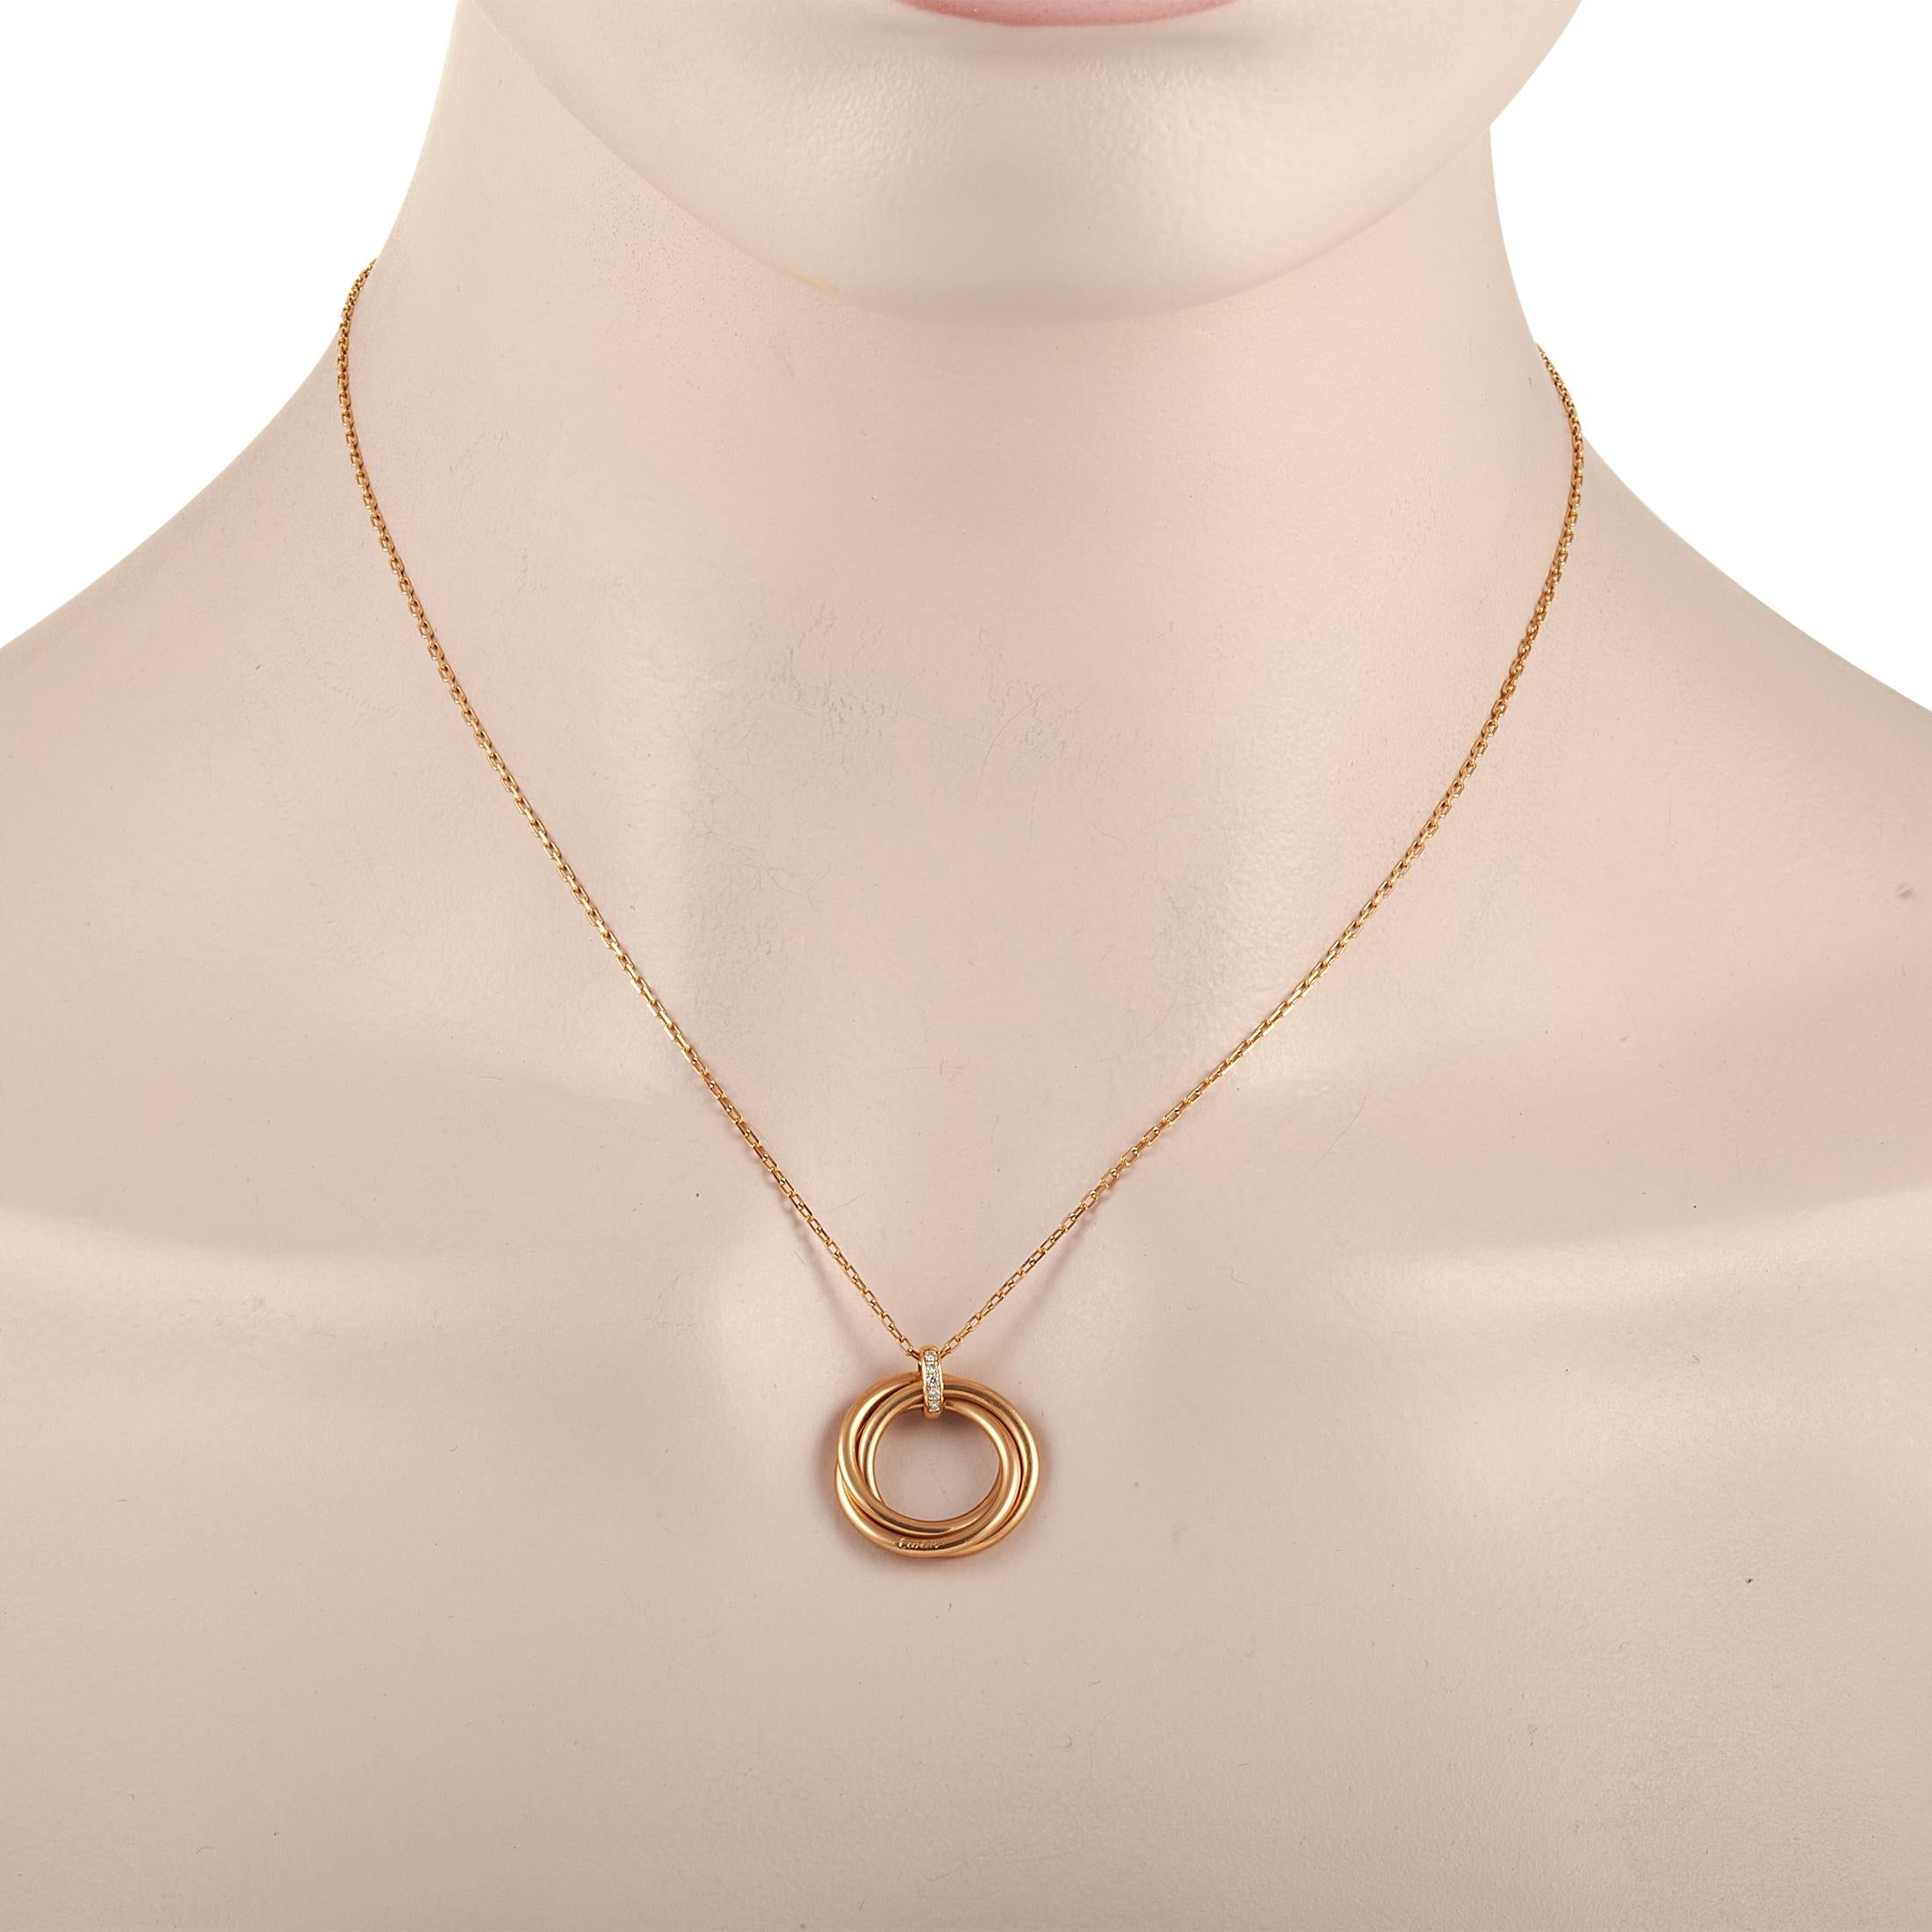 This stylish, simplistic Cartier Trinity pendant necklace is a celebration of the storied brand’s understated elegance. Suspended from a 16” chain is a .75” circular pendant that is comprised of three intertwined 18K Yellow Gold bands. Sparkling